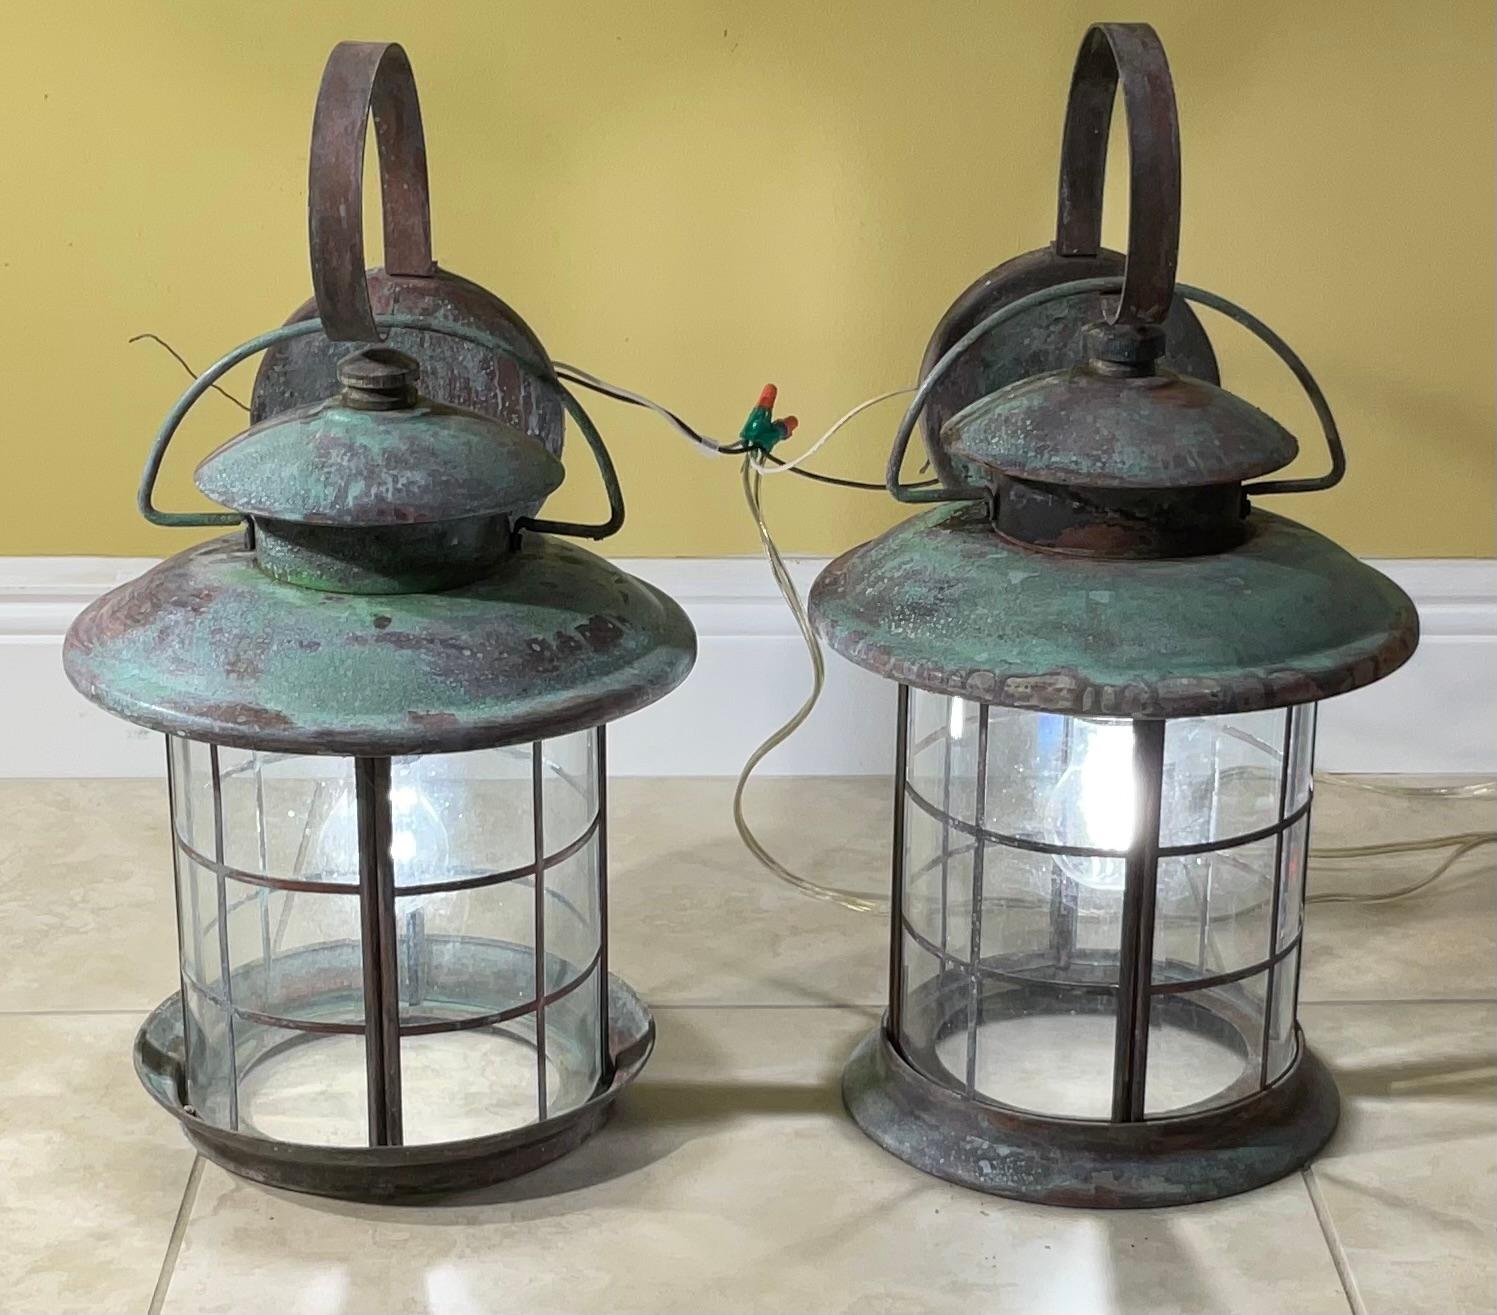 Elegant pair of wall lantern handcrafted of solid brass, quality workmanship, electrified with one 100/watt light each, decorative brass trimming around the glass. Great light exposure.
Suitable for wet location. 
The lantern are slightly different